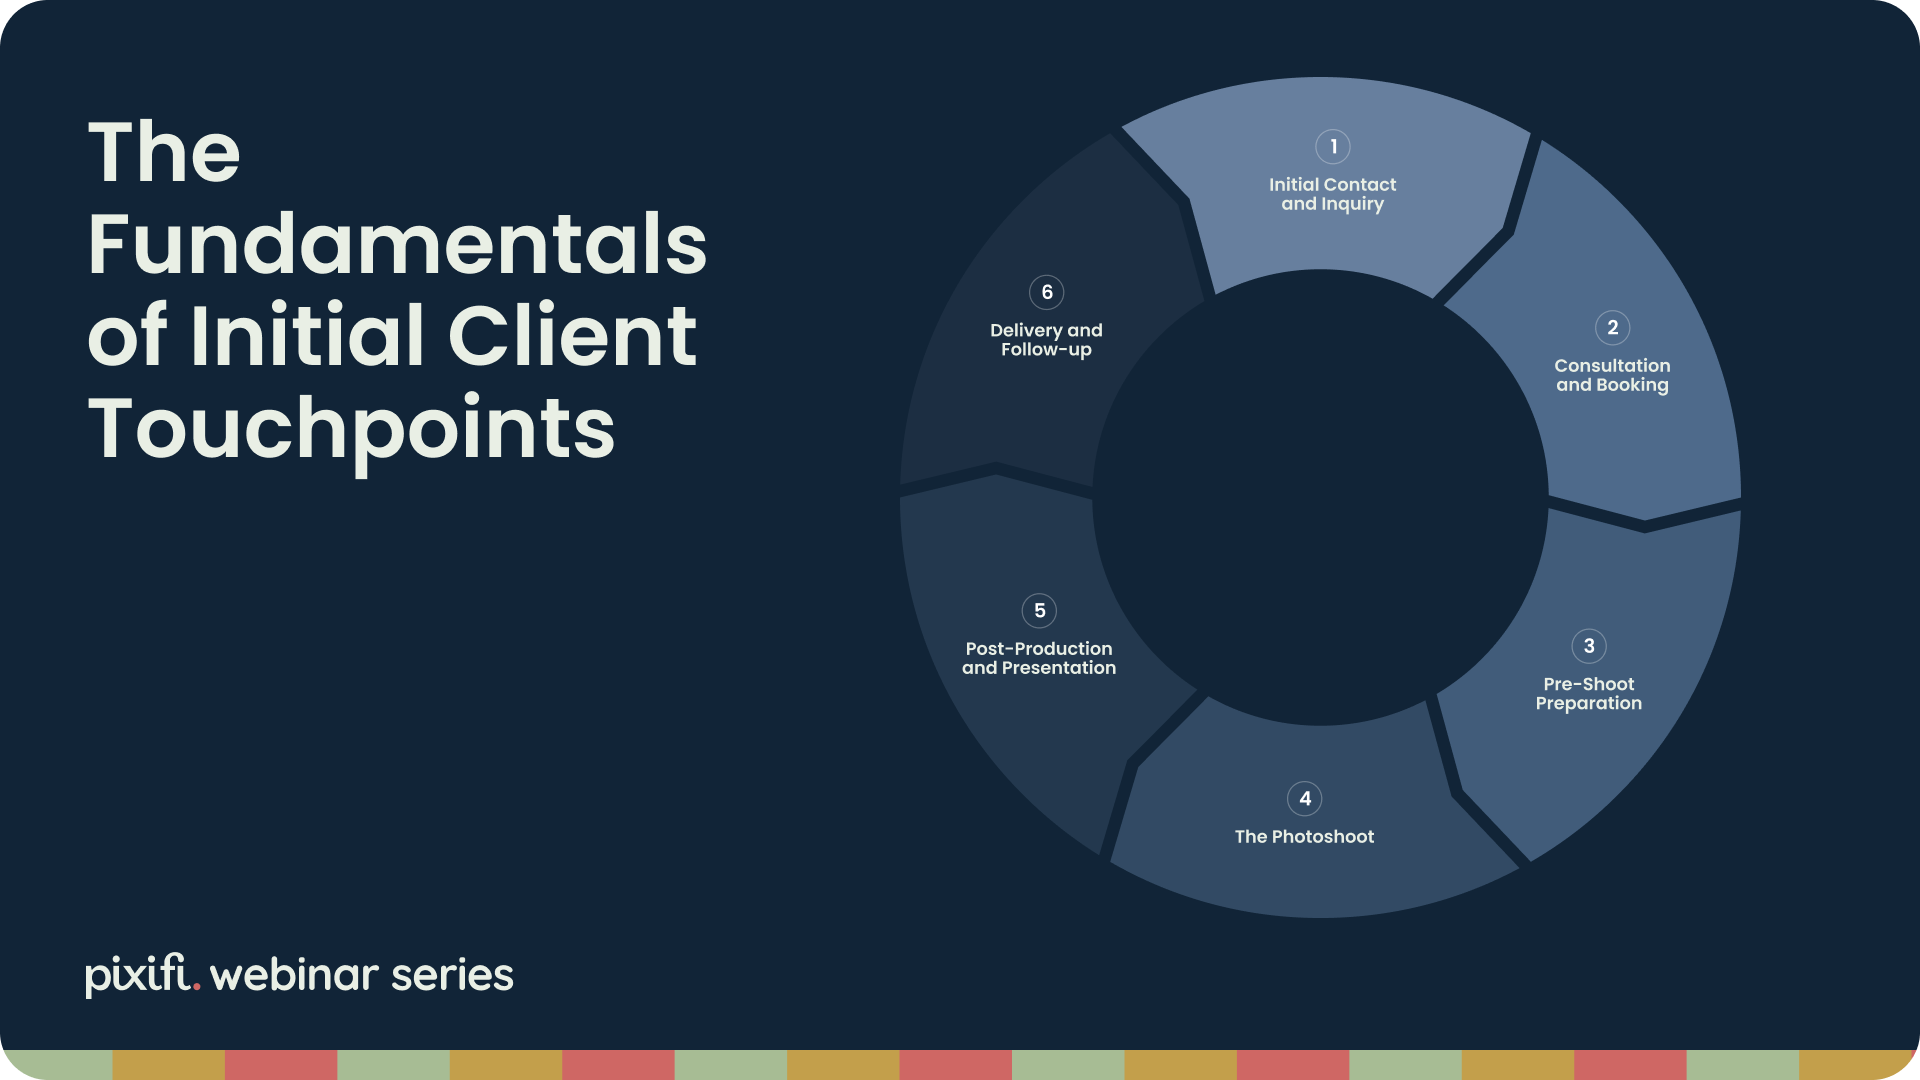 The Fundamentals of Initial Client Touchpoints